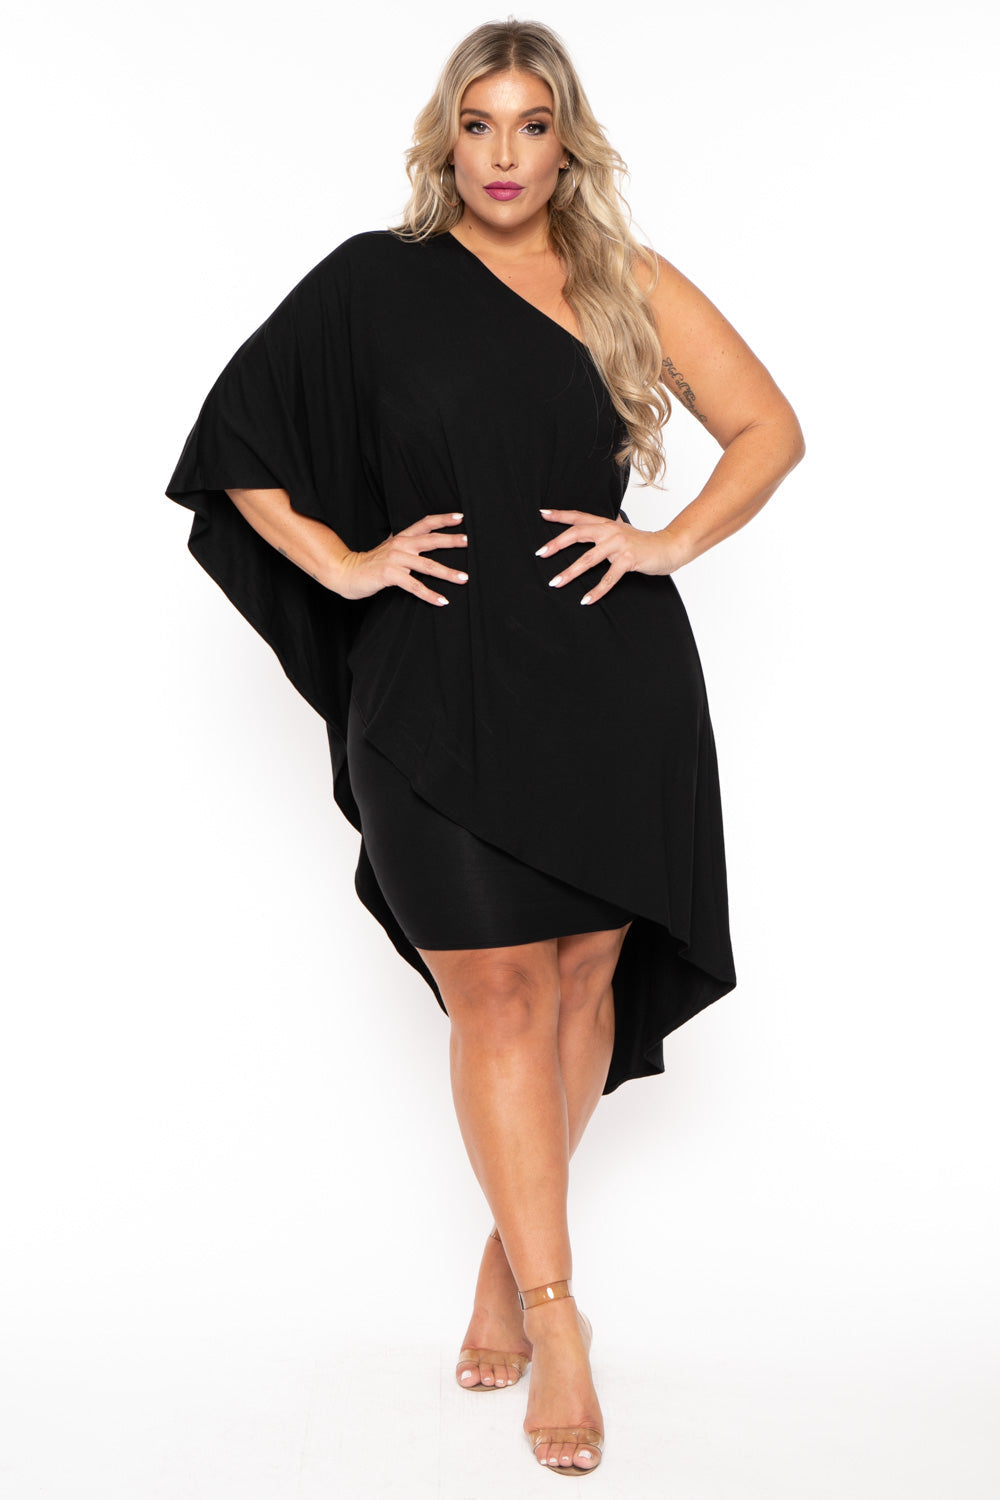 Plus Size Women's Clothing From CurvySense.com 